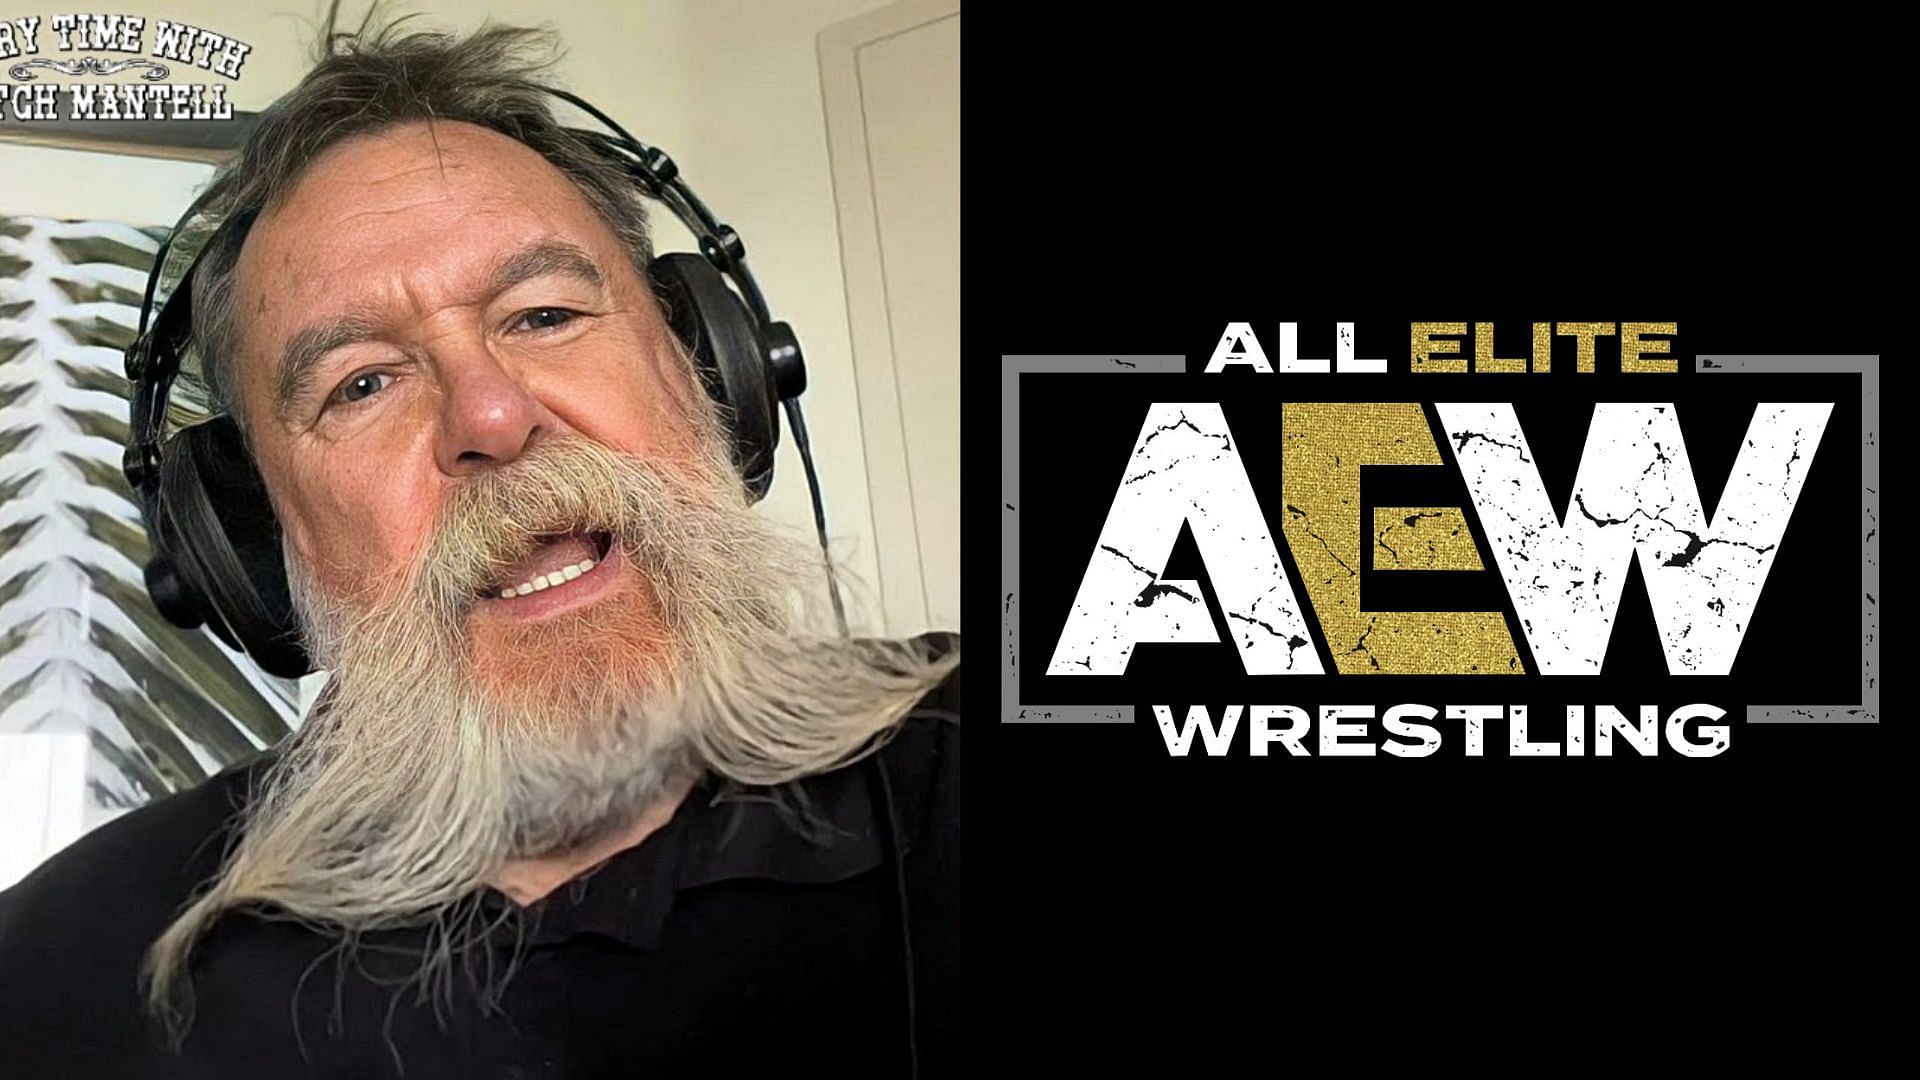 Dutch Mantell has weighed in on AEW